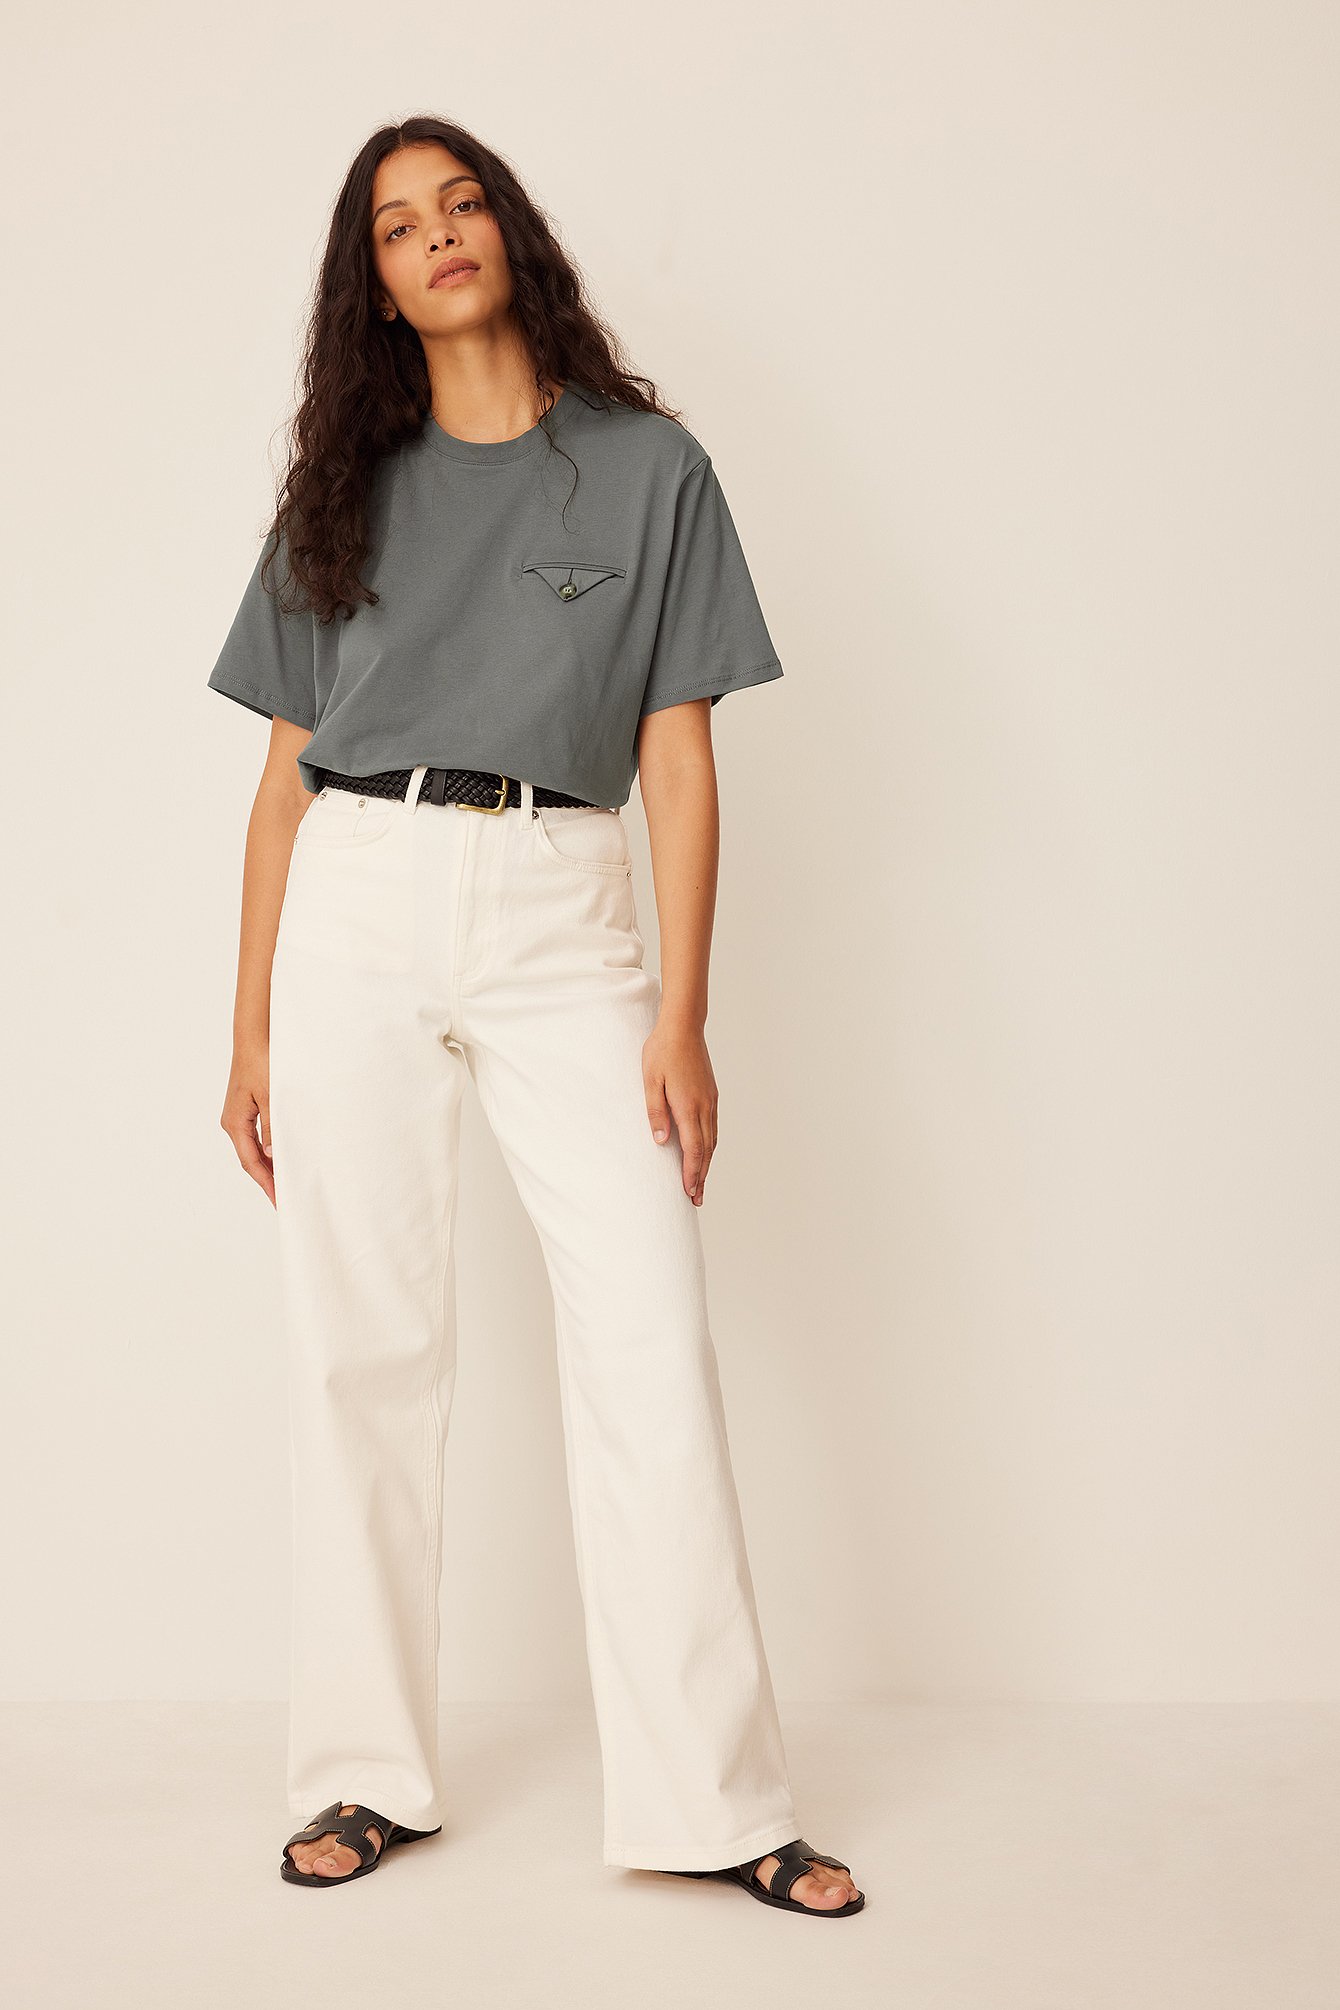 Pocket Detail T-shirt Outfit